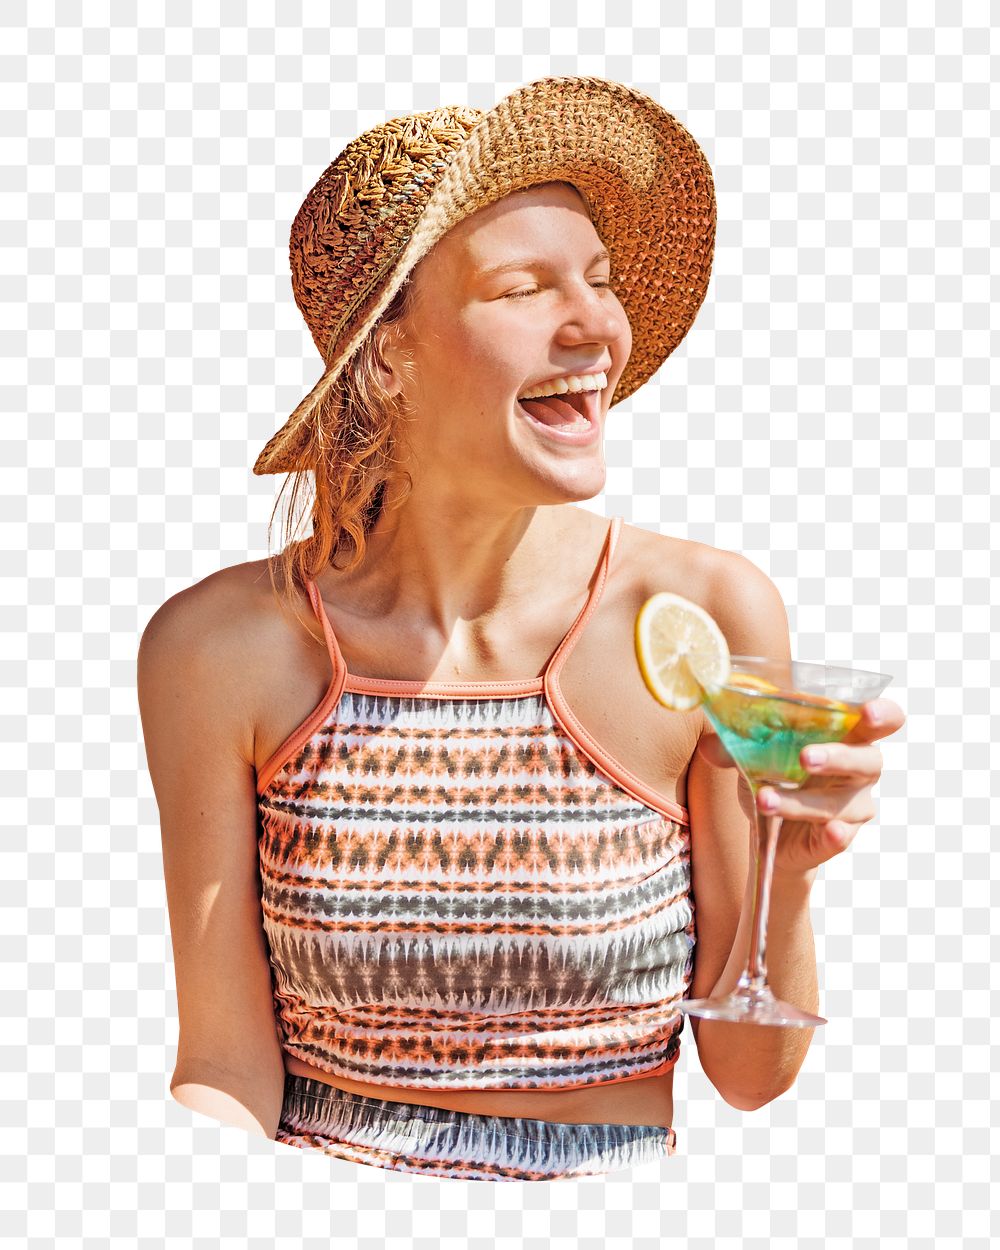 Png woman enjoying the sun, isolated collage element, transparent background